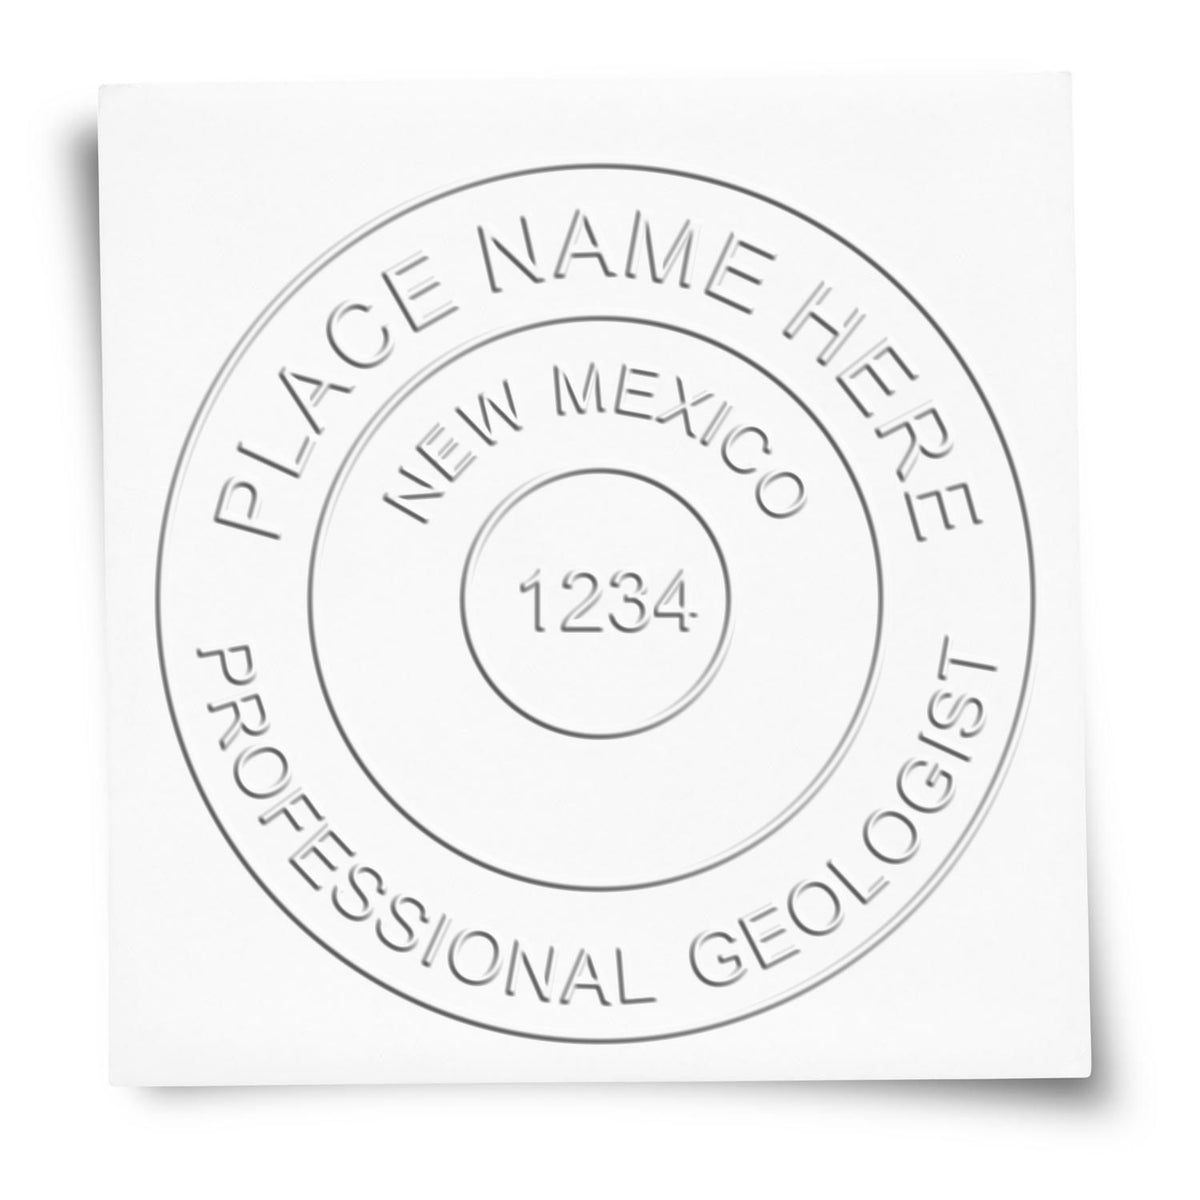 An alternative view of the Soft New Mexico Professional Geologist Seal stamped on a sheet of paper showing the image in use